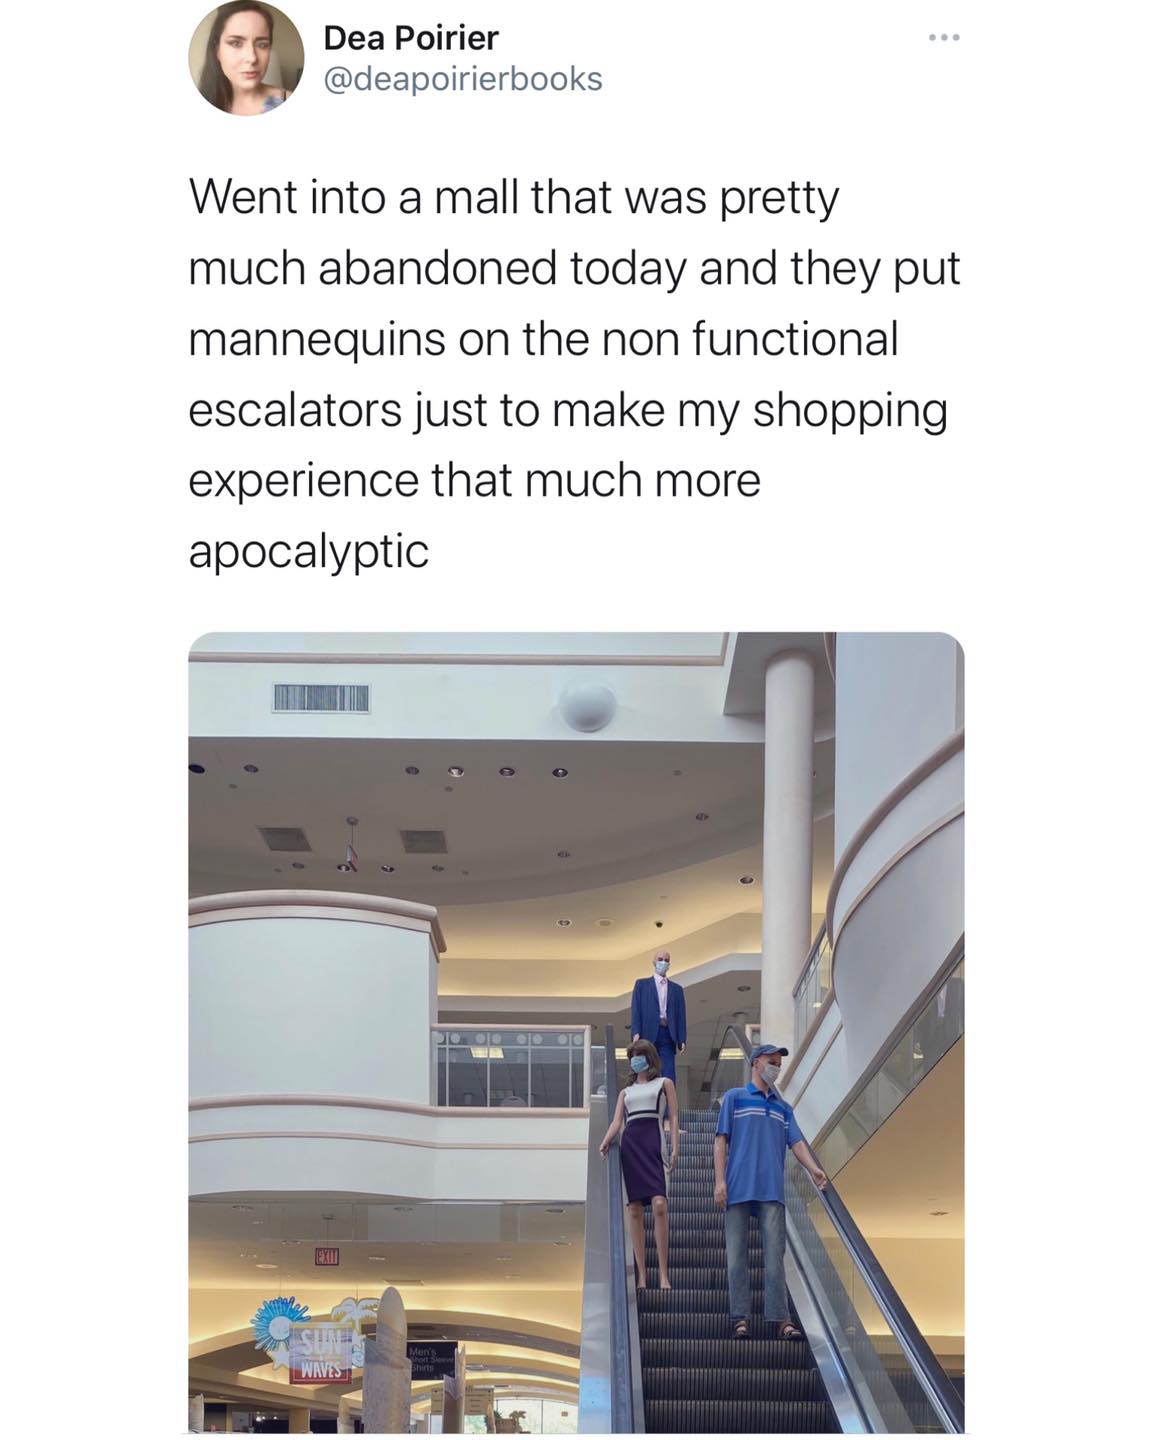 angle - ... Dea Poirier Went into a mall that was pretty much abandoned today and they put mannequins on the non functional escalators just to make my shopping experience that much more apocalyptic Moni Waves